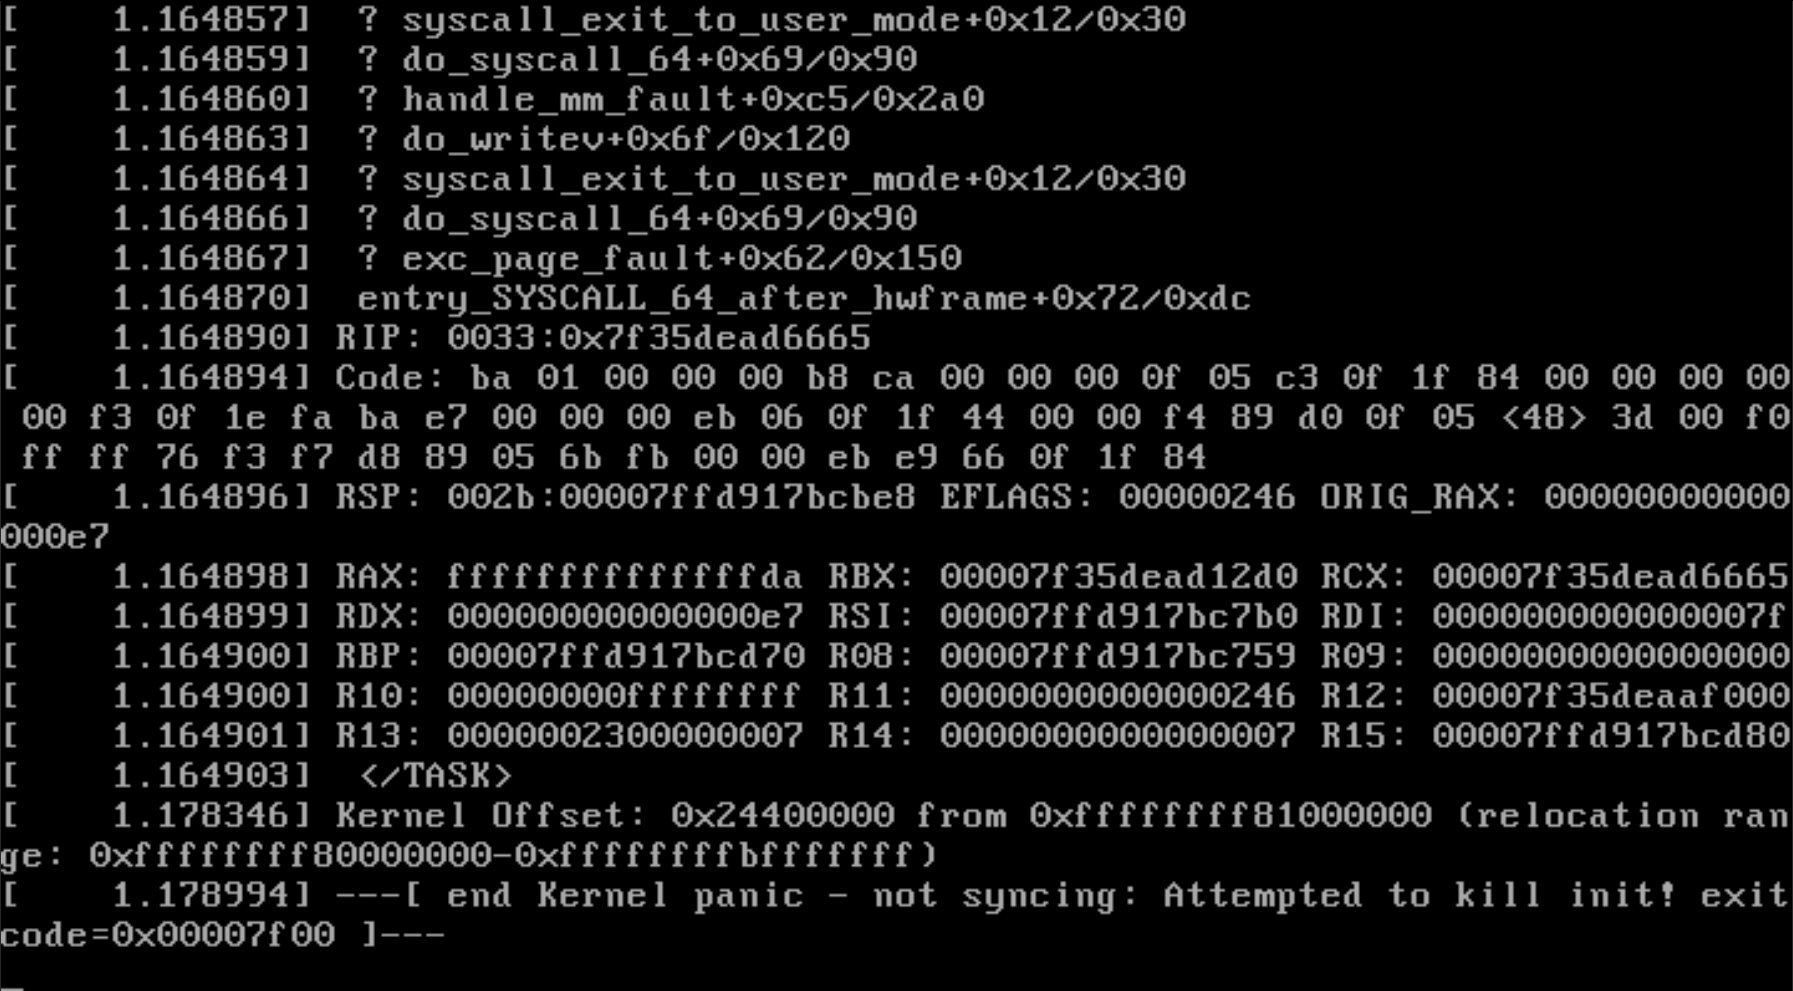 Kernel Panic during boot